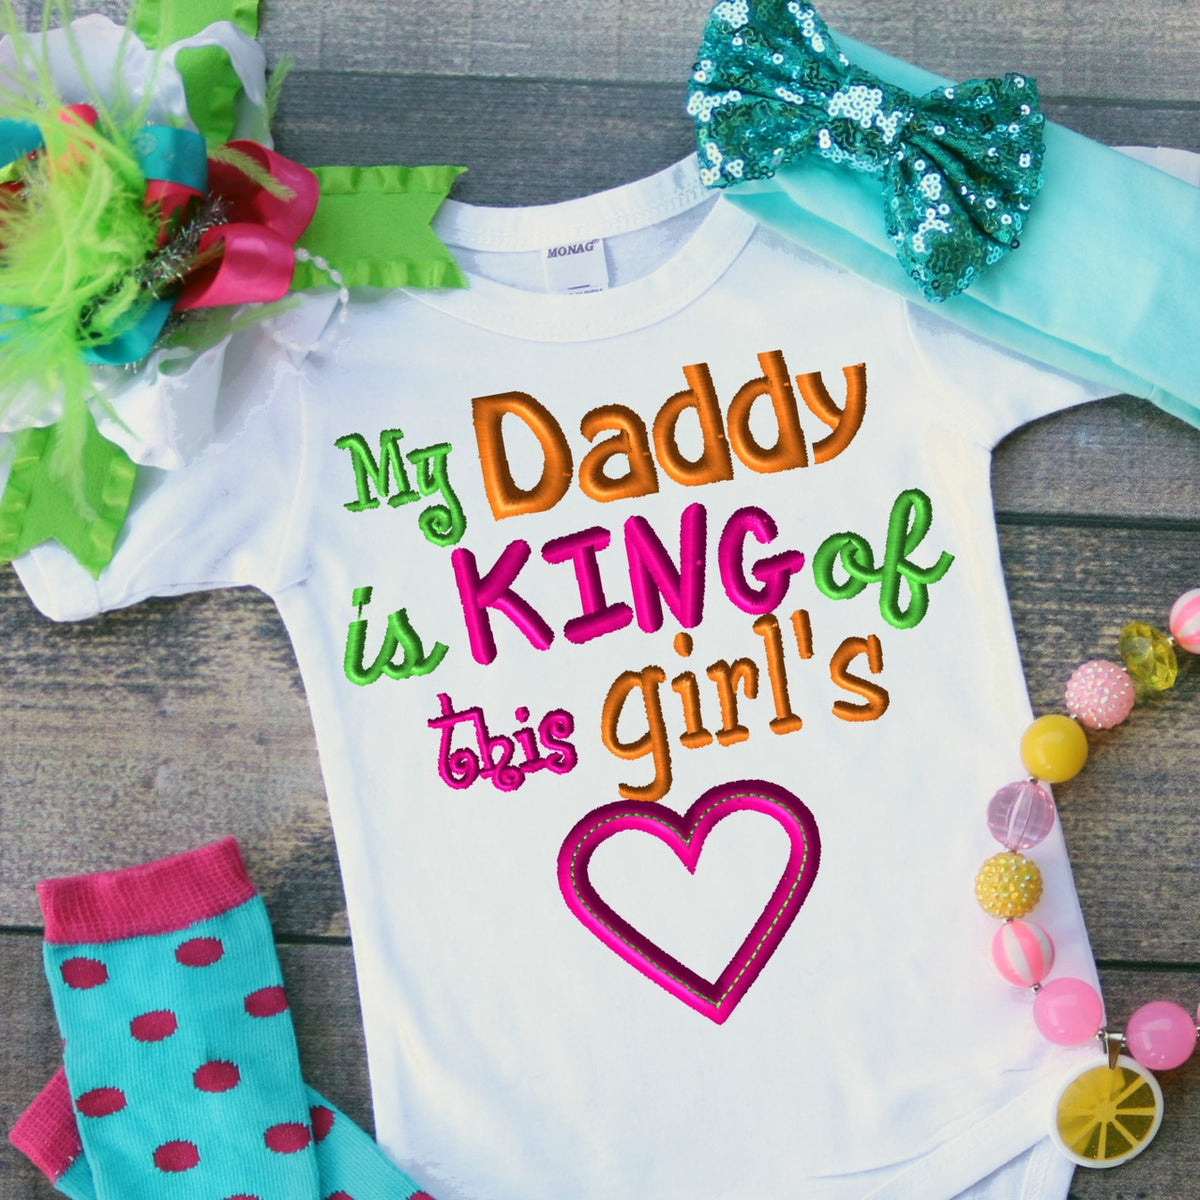 Daddy Is King Of This Girl's Heart Embroidery Design - Ellie and Mac, Digital (PDF) Sewing Patterns | USA, Canada, UK, Australia